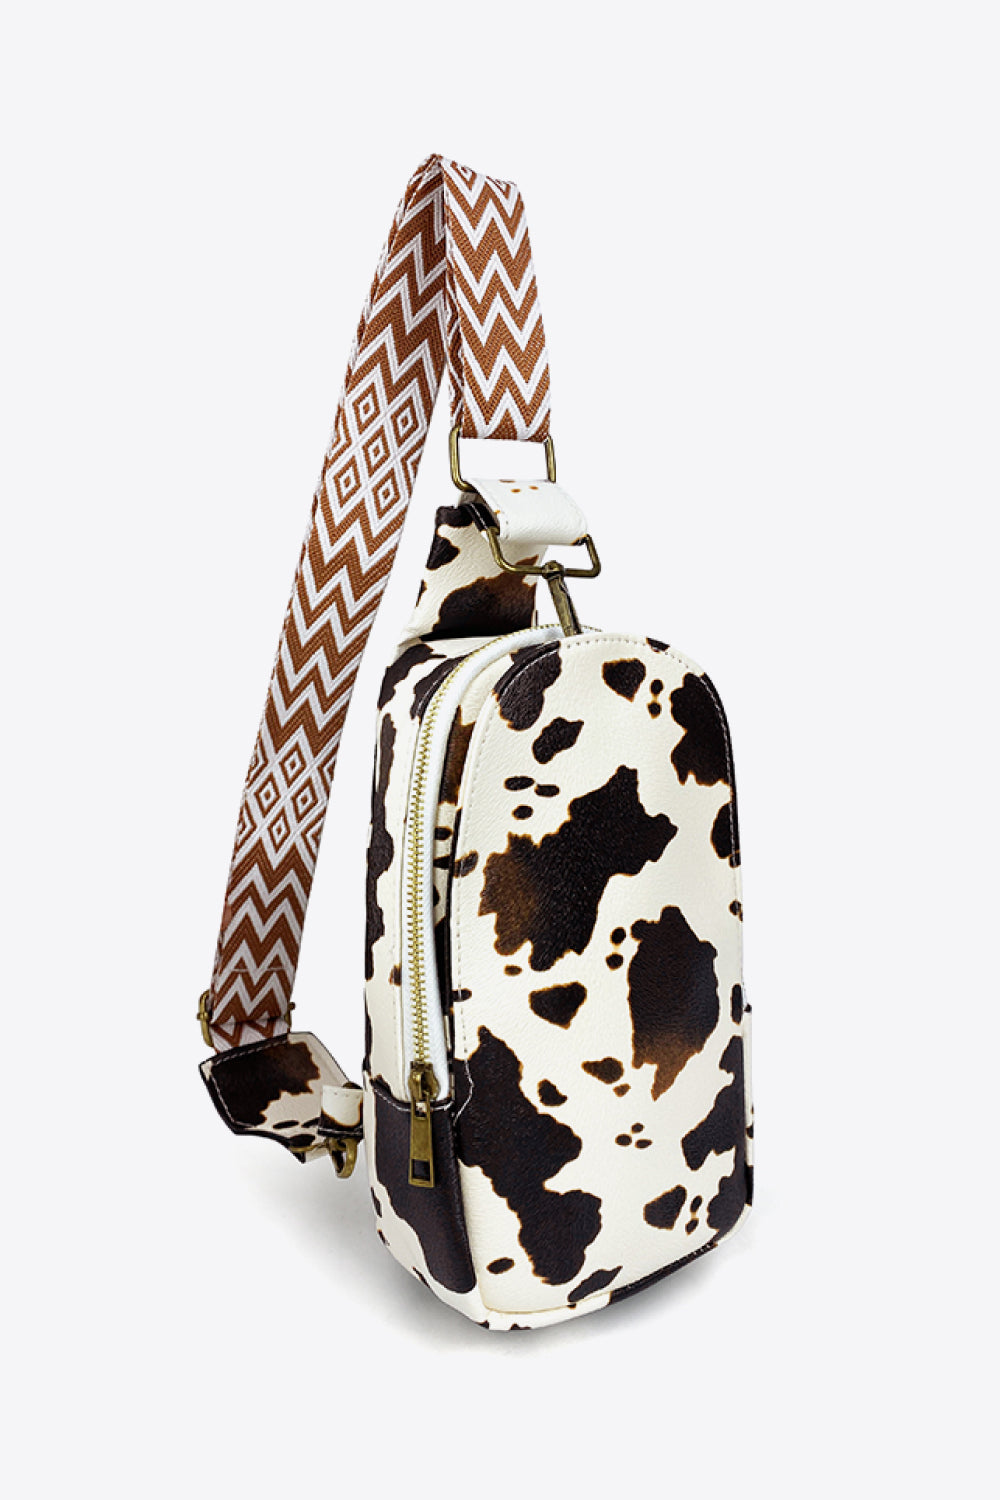 Urbanista Printed Faux Leather Sling Bag